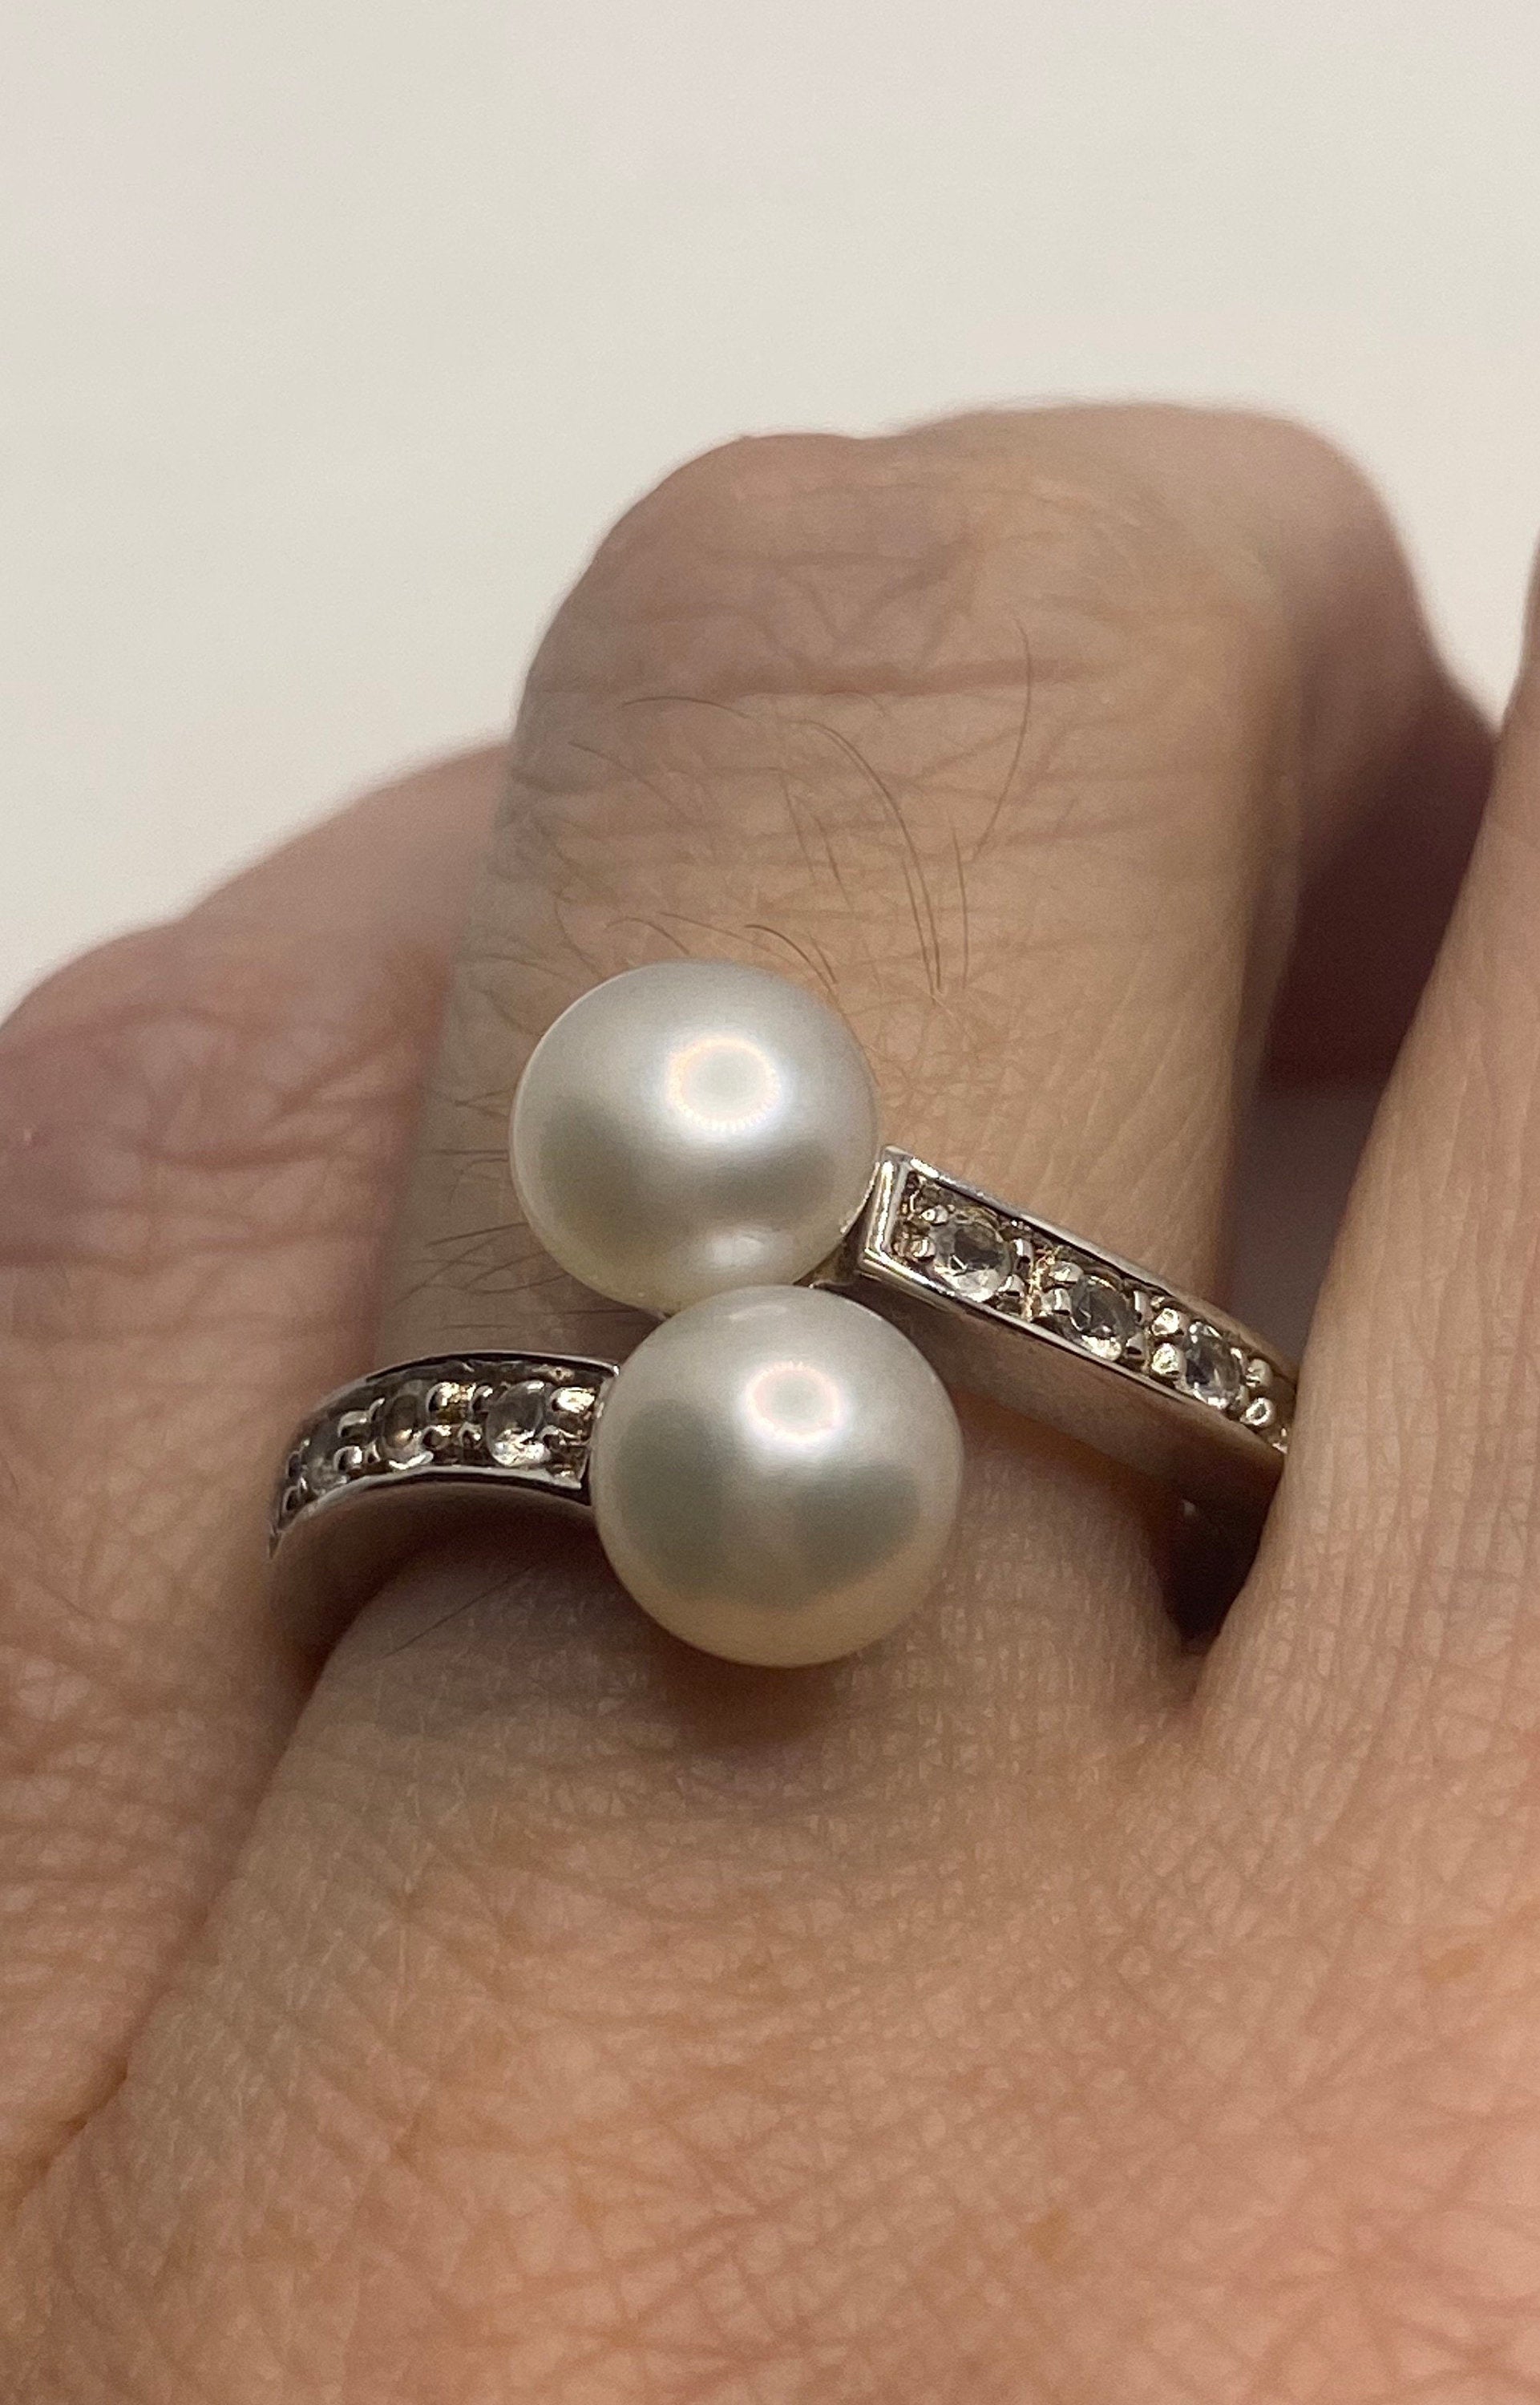 Vintage White Pearl 925 Sterling Silver Cocktail Ring Size 6.5